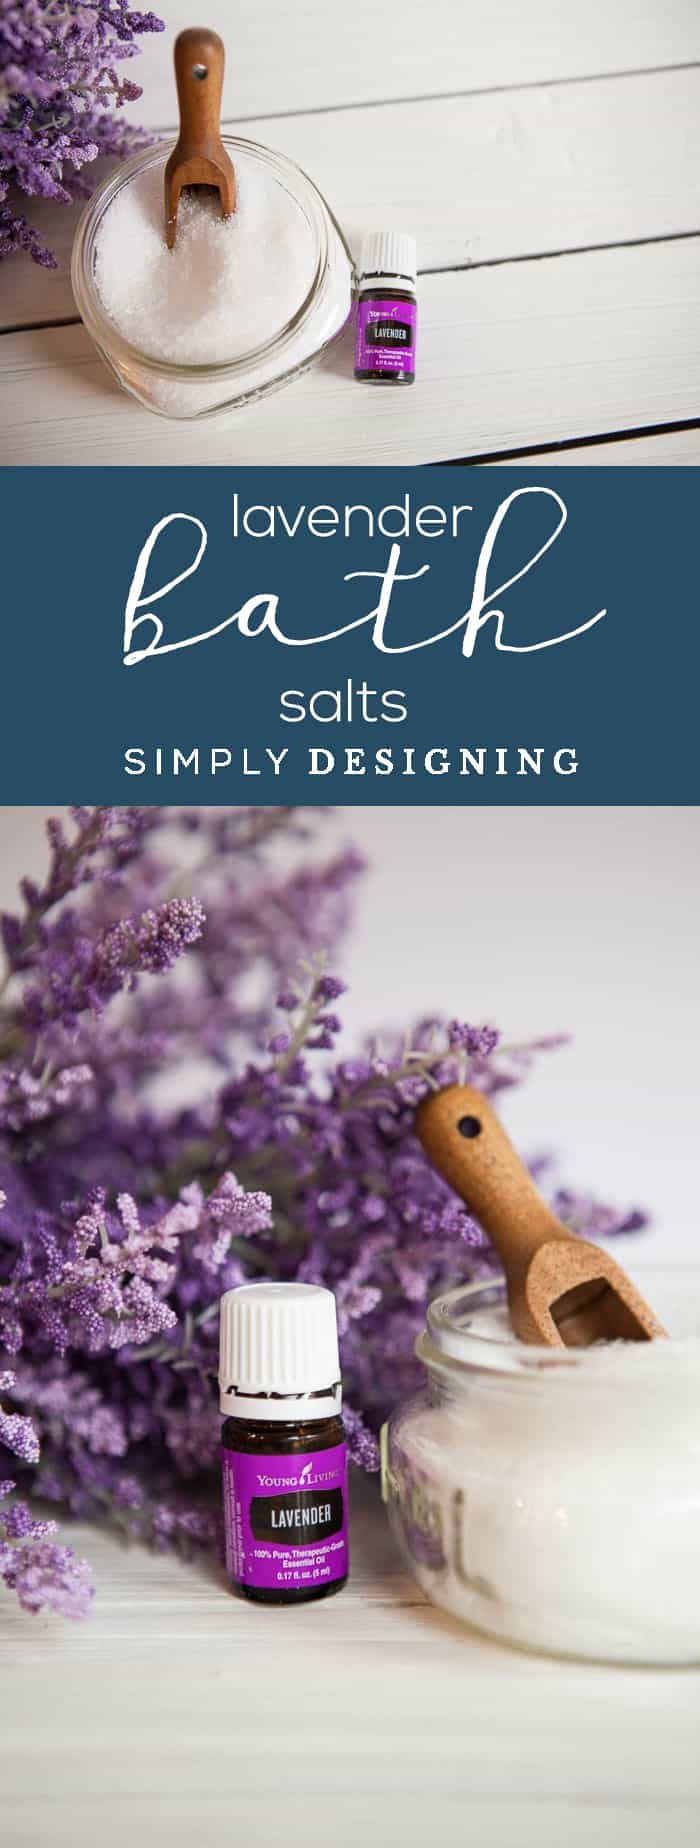 Lavender Bath Salts - this homemade bath salt recipe is so easy to make and will save you so much money too